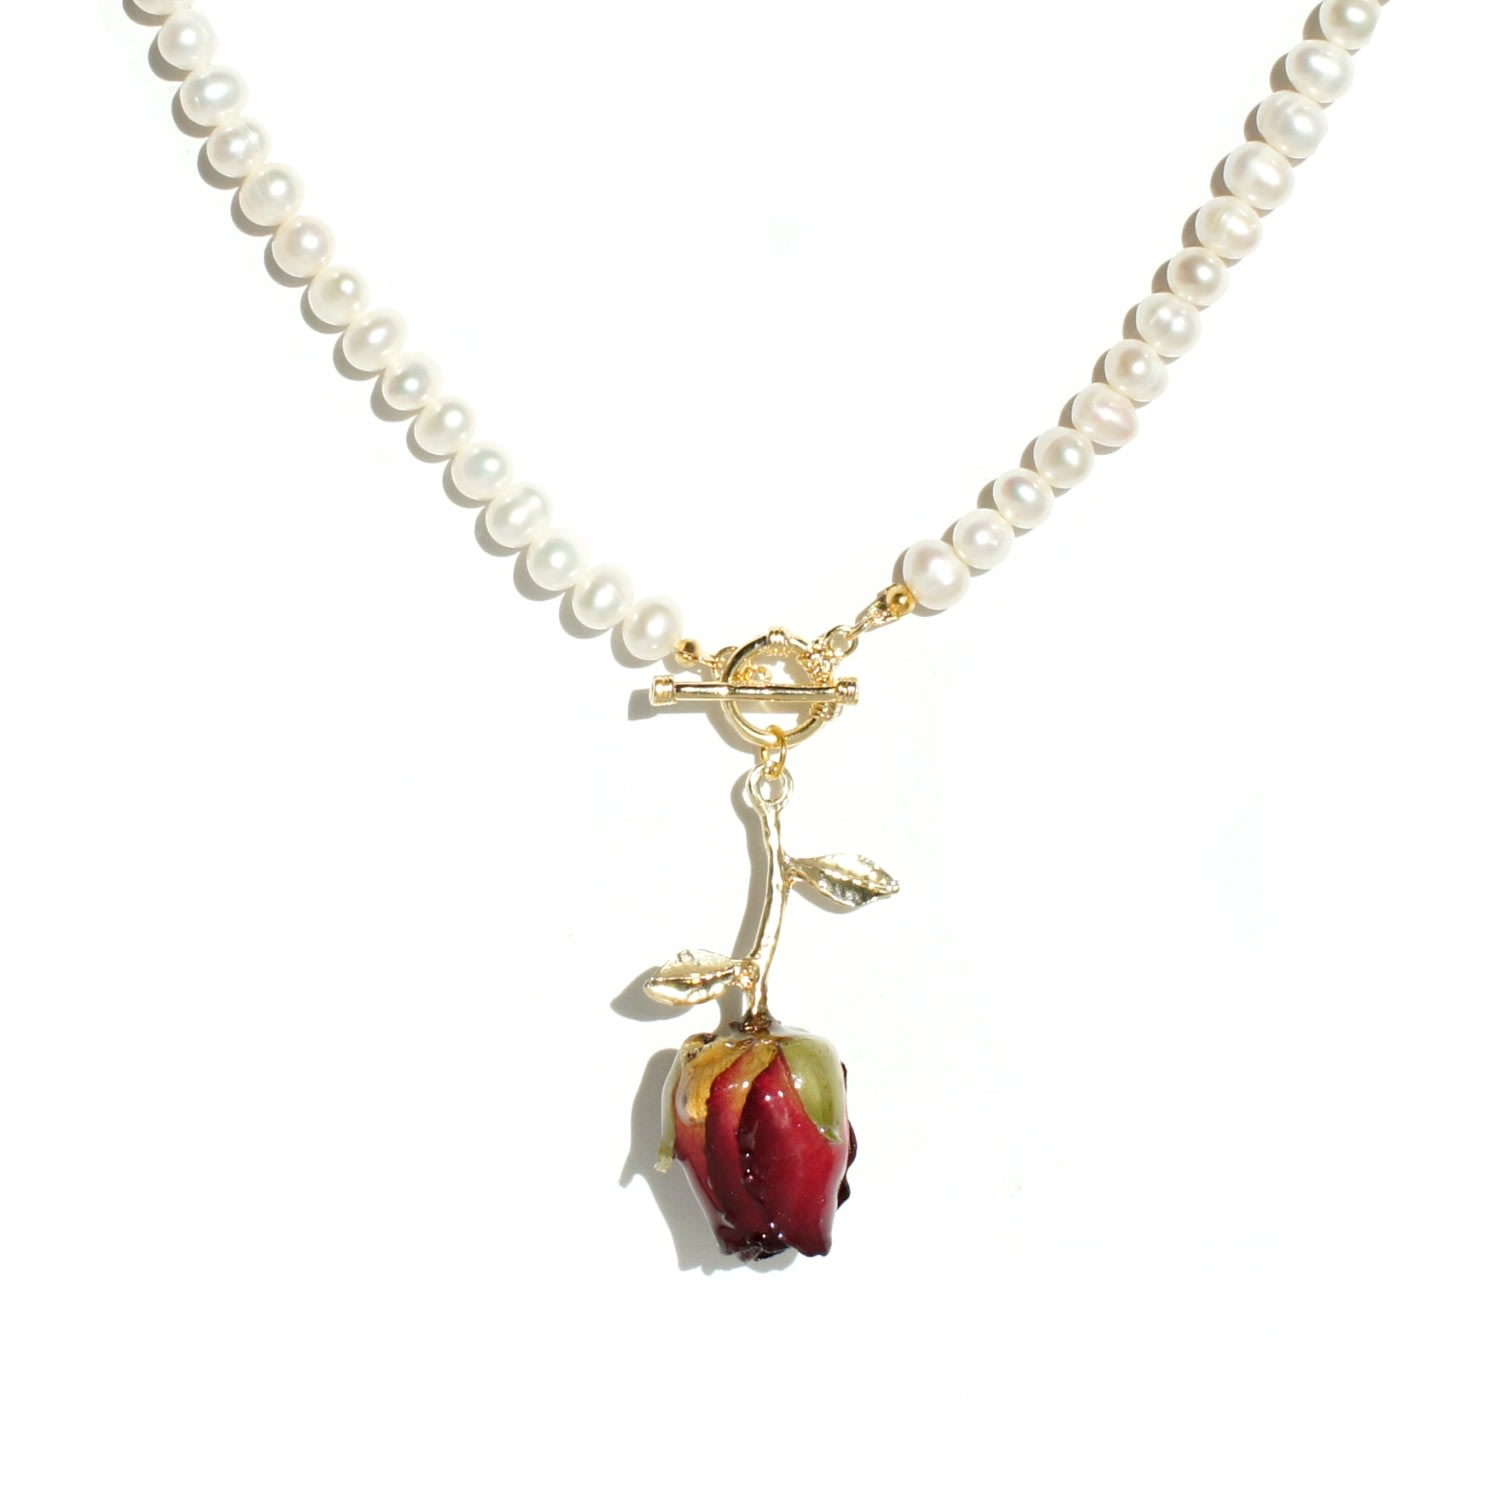 I'mmany London Women's White / Red Real Flower Grande Amore Freshwater Pearl Choker Necklace With Rosebud Pendant In Pink